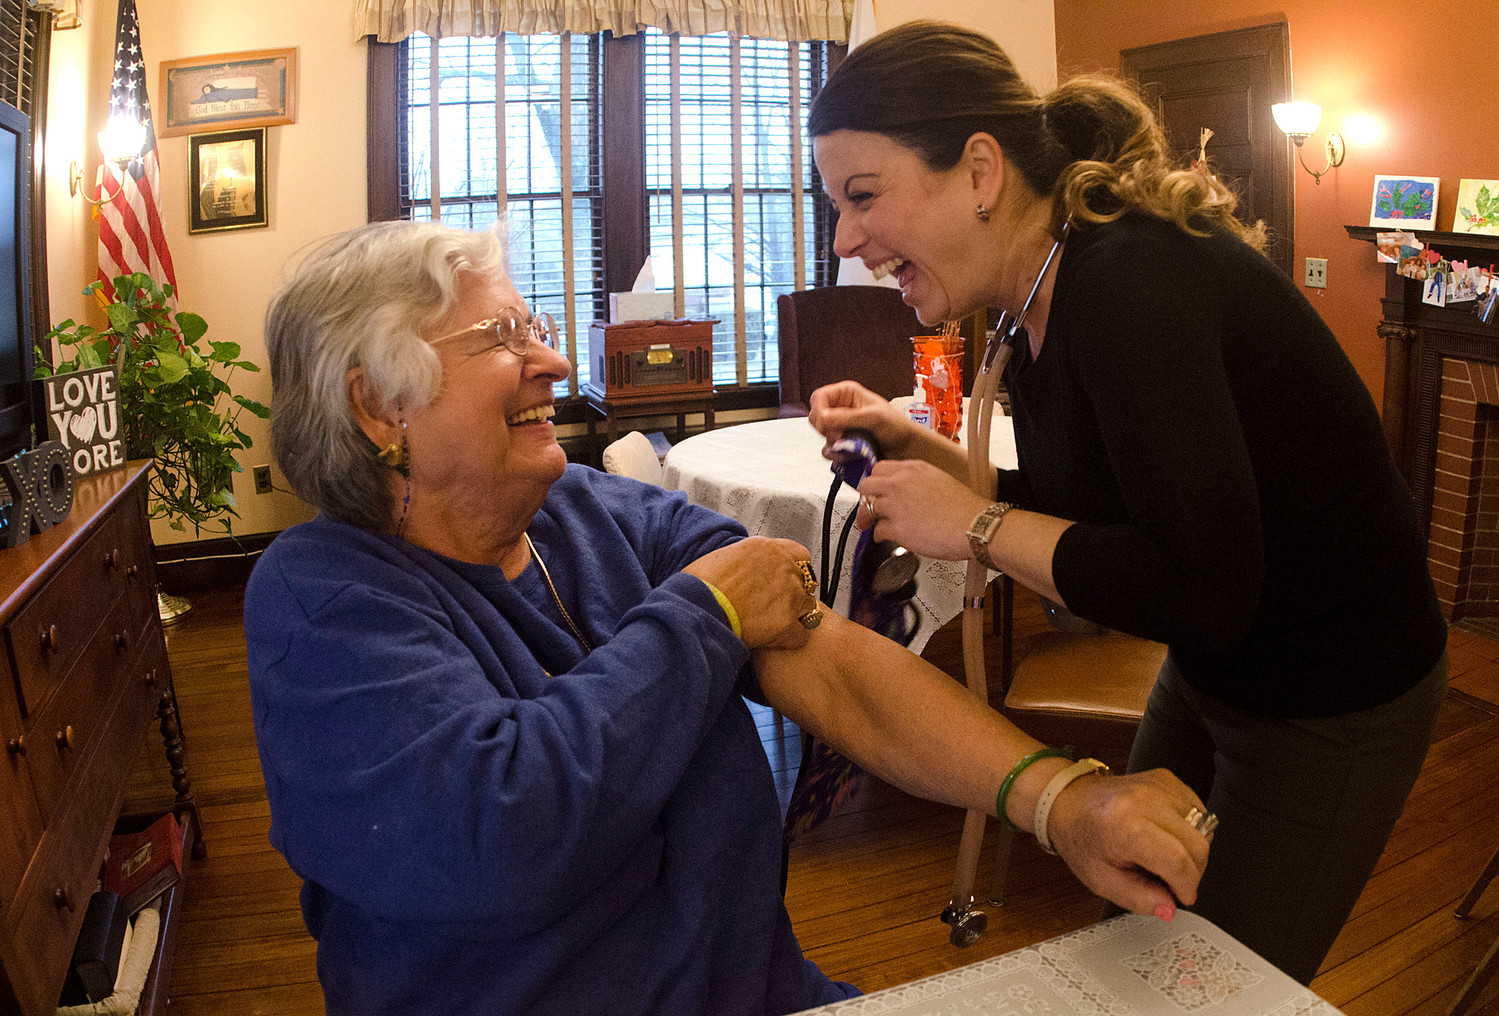 Maria Rodrigues (left) shares a laugh with registered nurse Paula Lage of Willows at Grace Barker during a blood pressure screening before lunch at the Benjamin Church Senior Center.